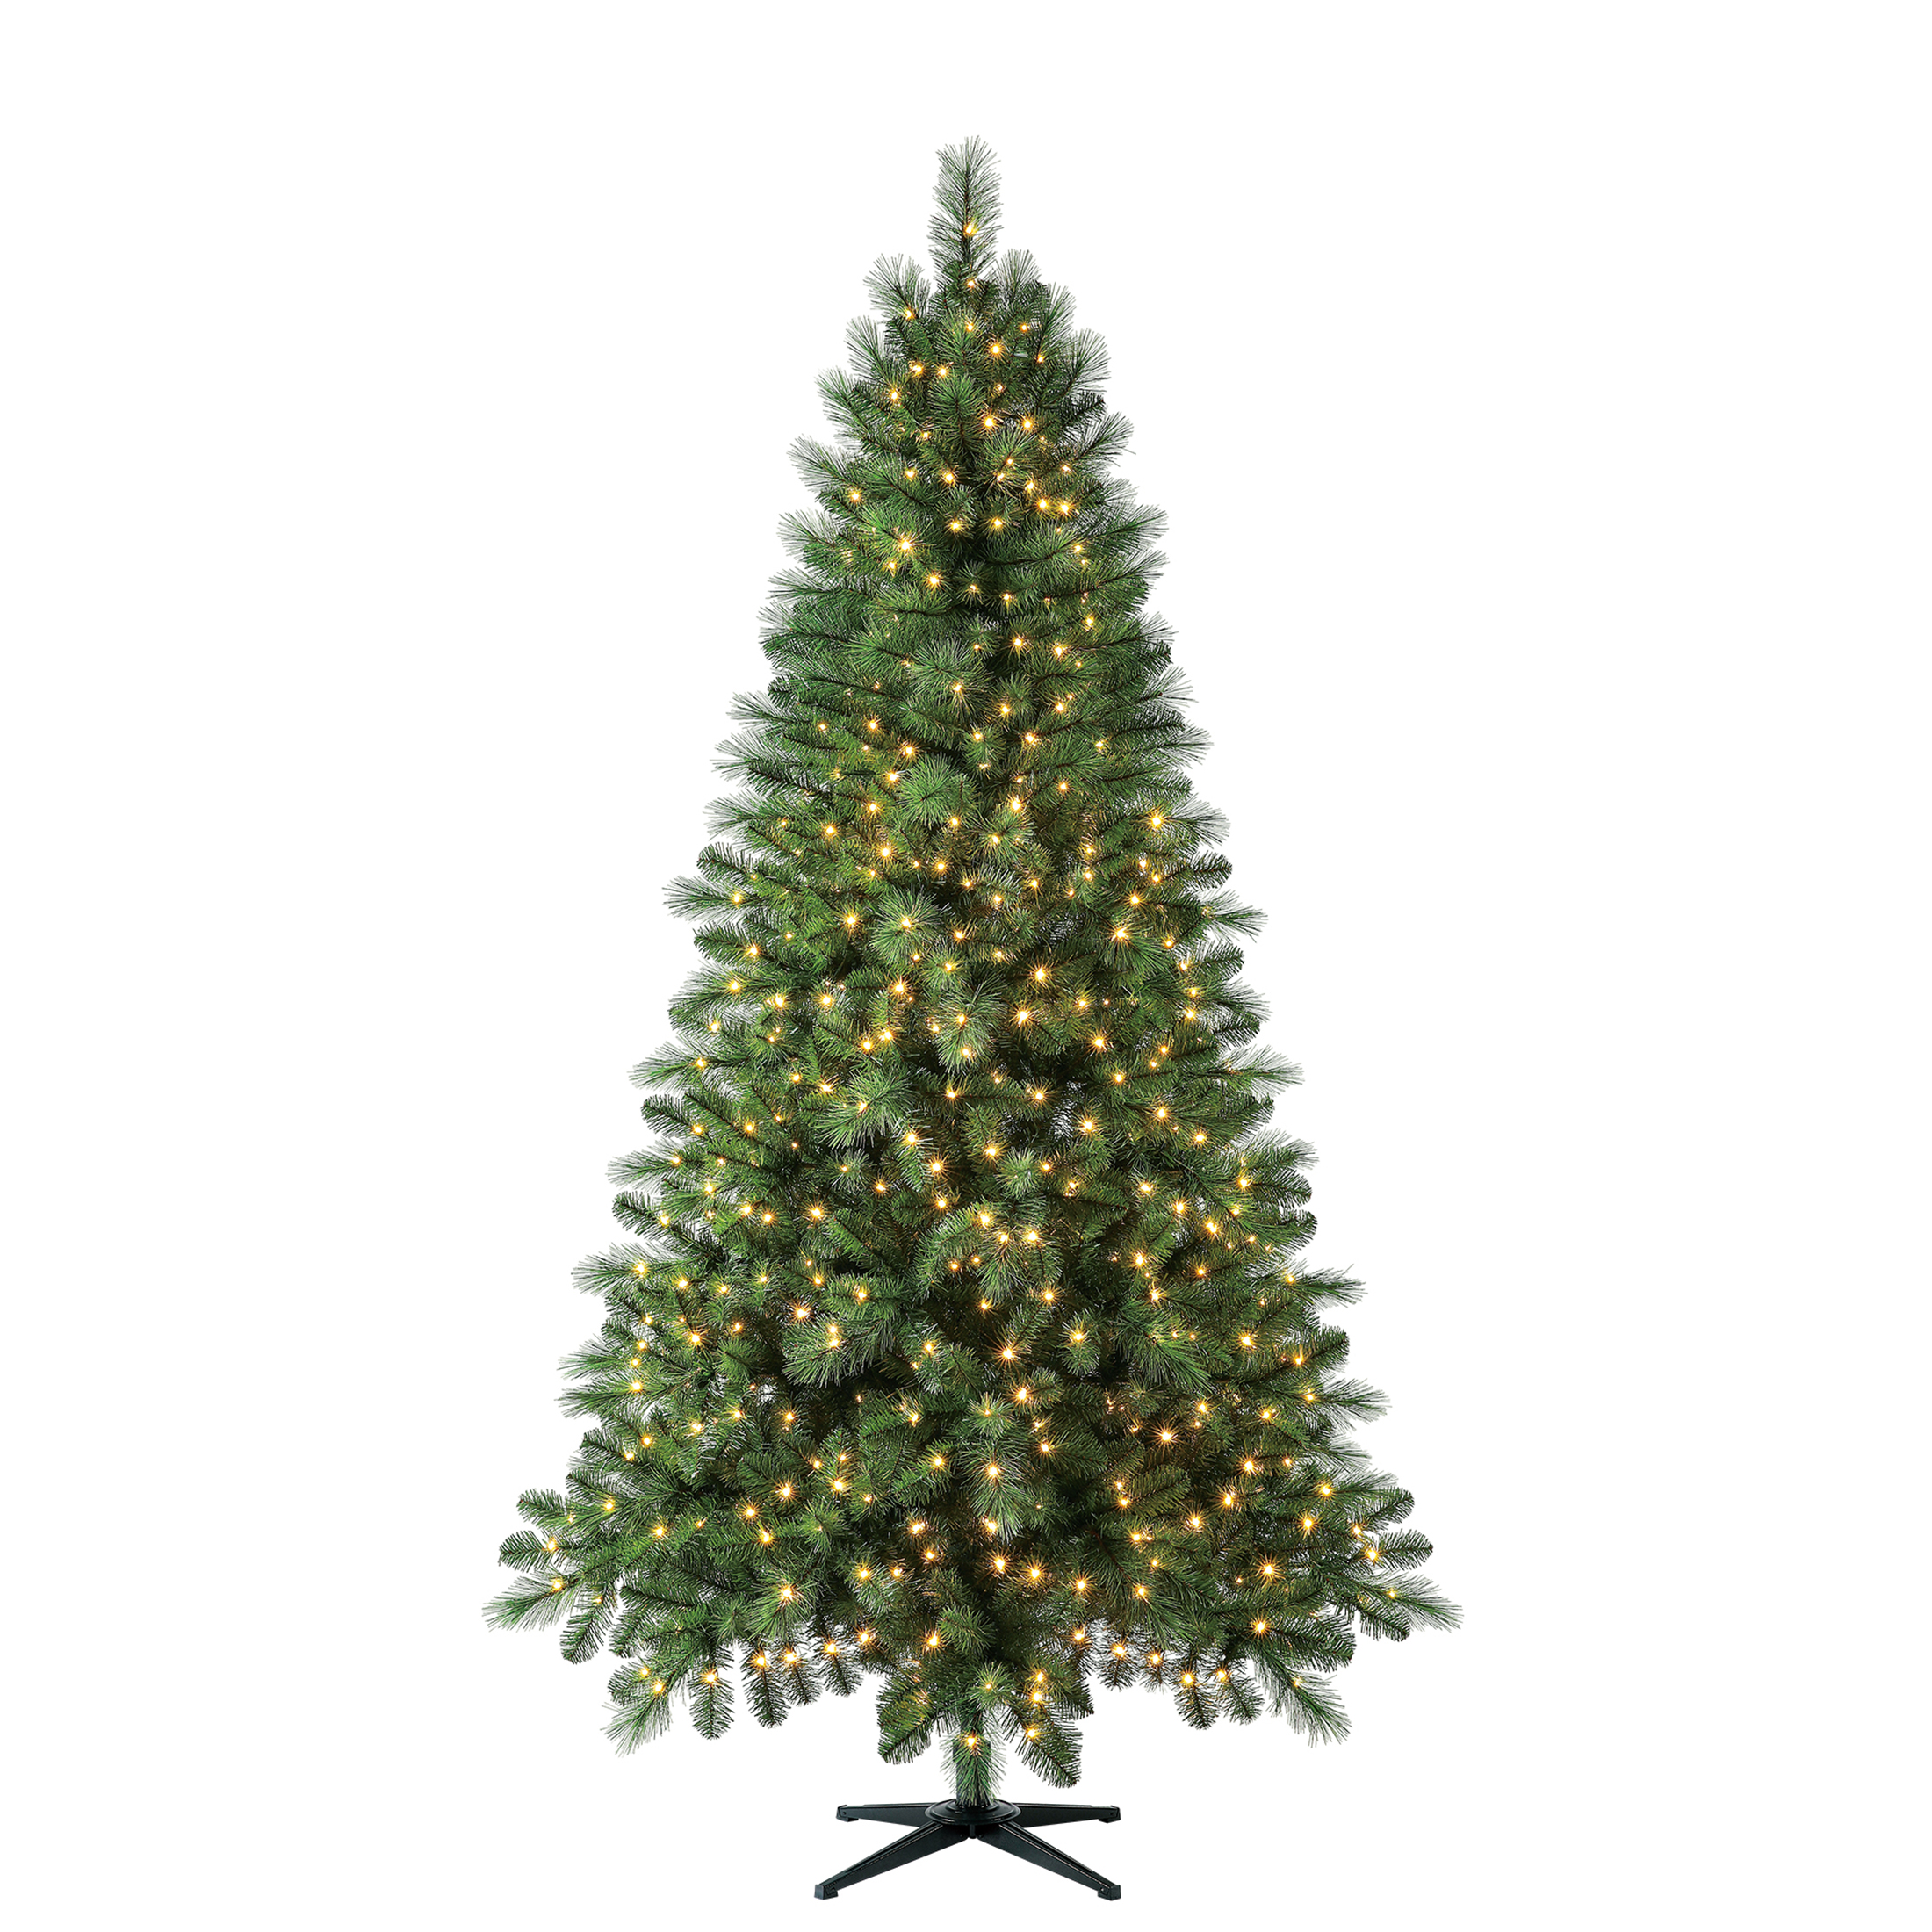 Evergreen Classics Westwood Clear Prelit LED Green Full Christmas Tree, 7.5' - image 1 of 7